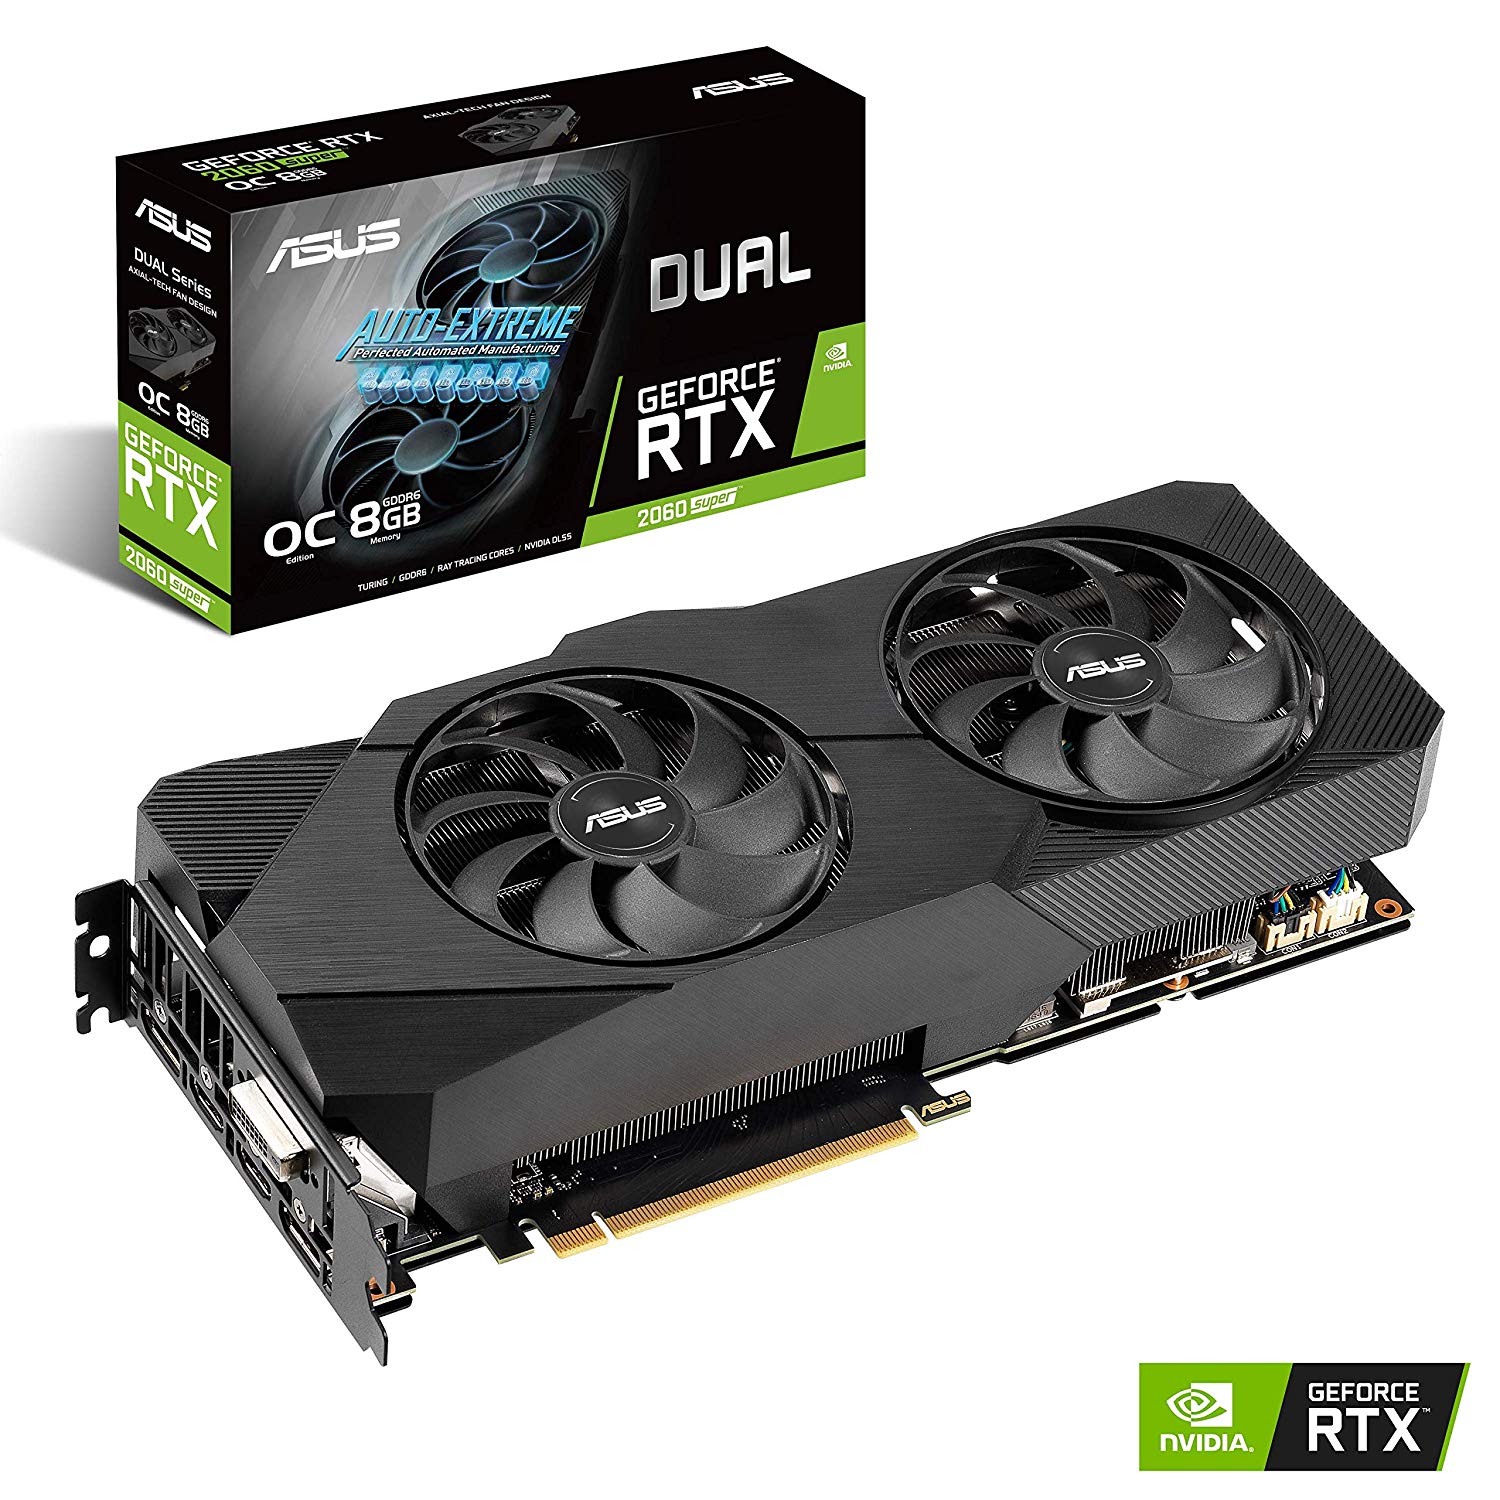 BEST RTX 2070 GRAPHICS CARD